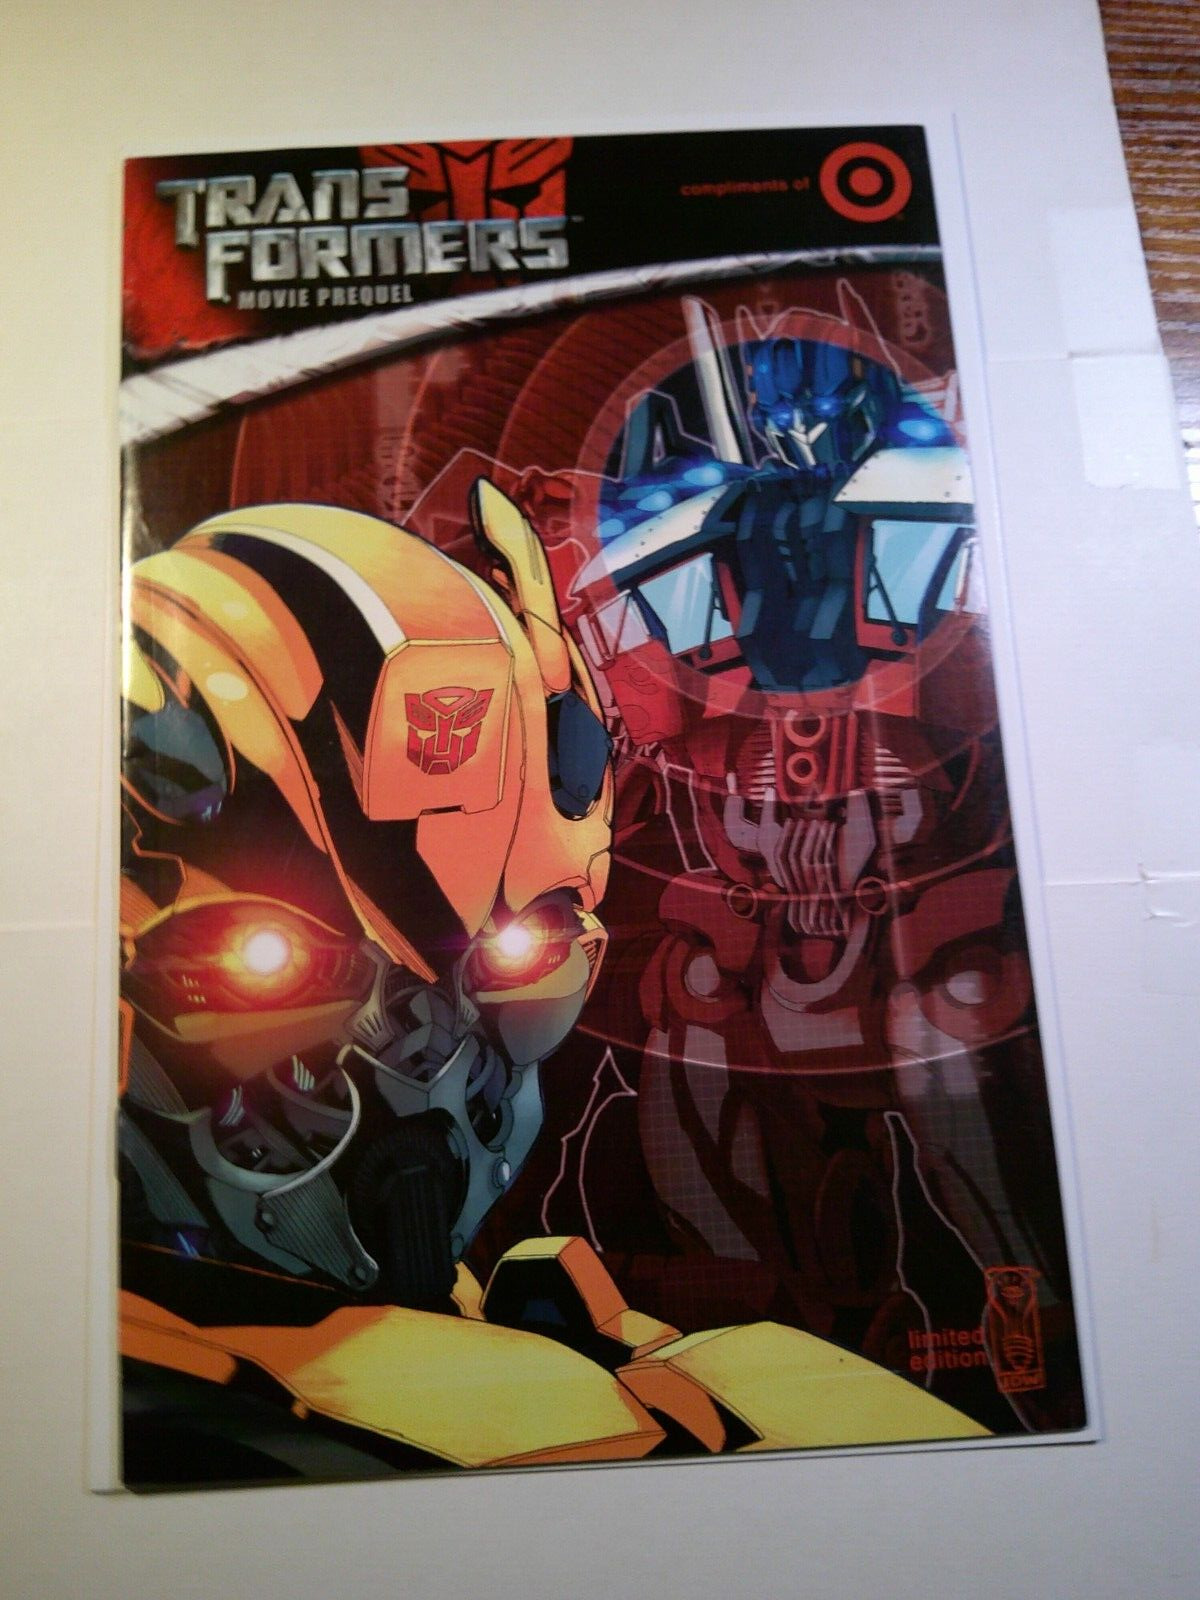 Transformers Movie Prequel, Target Giveaway, VF